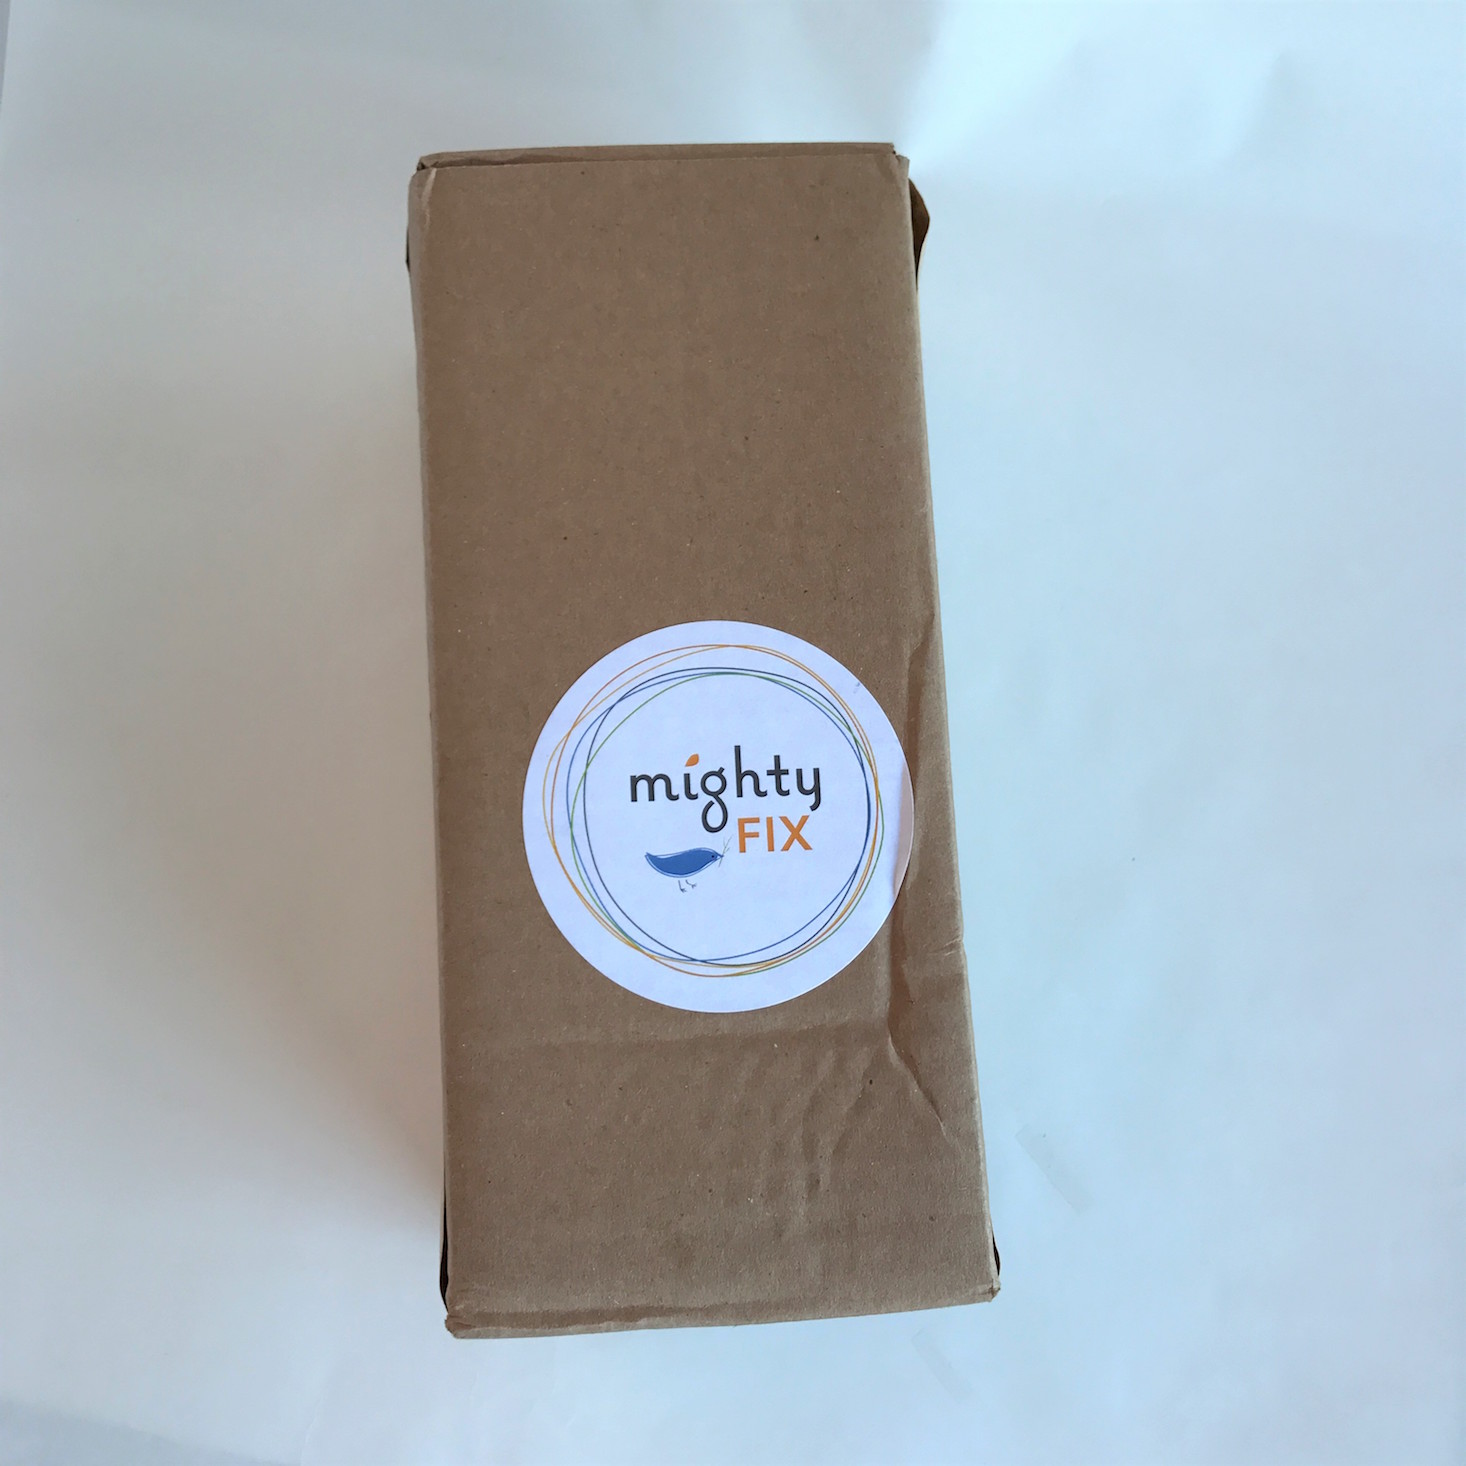 Mighty Fix Review + 70% Off Coupon – February 2018